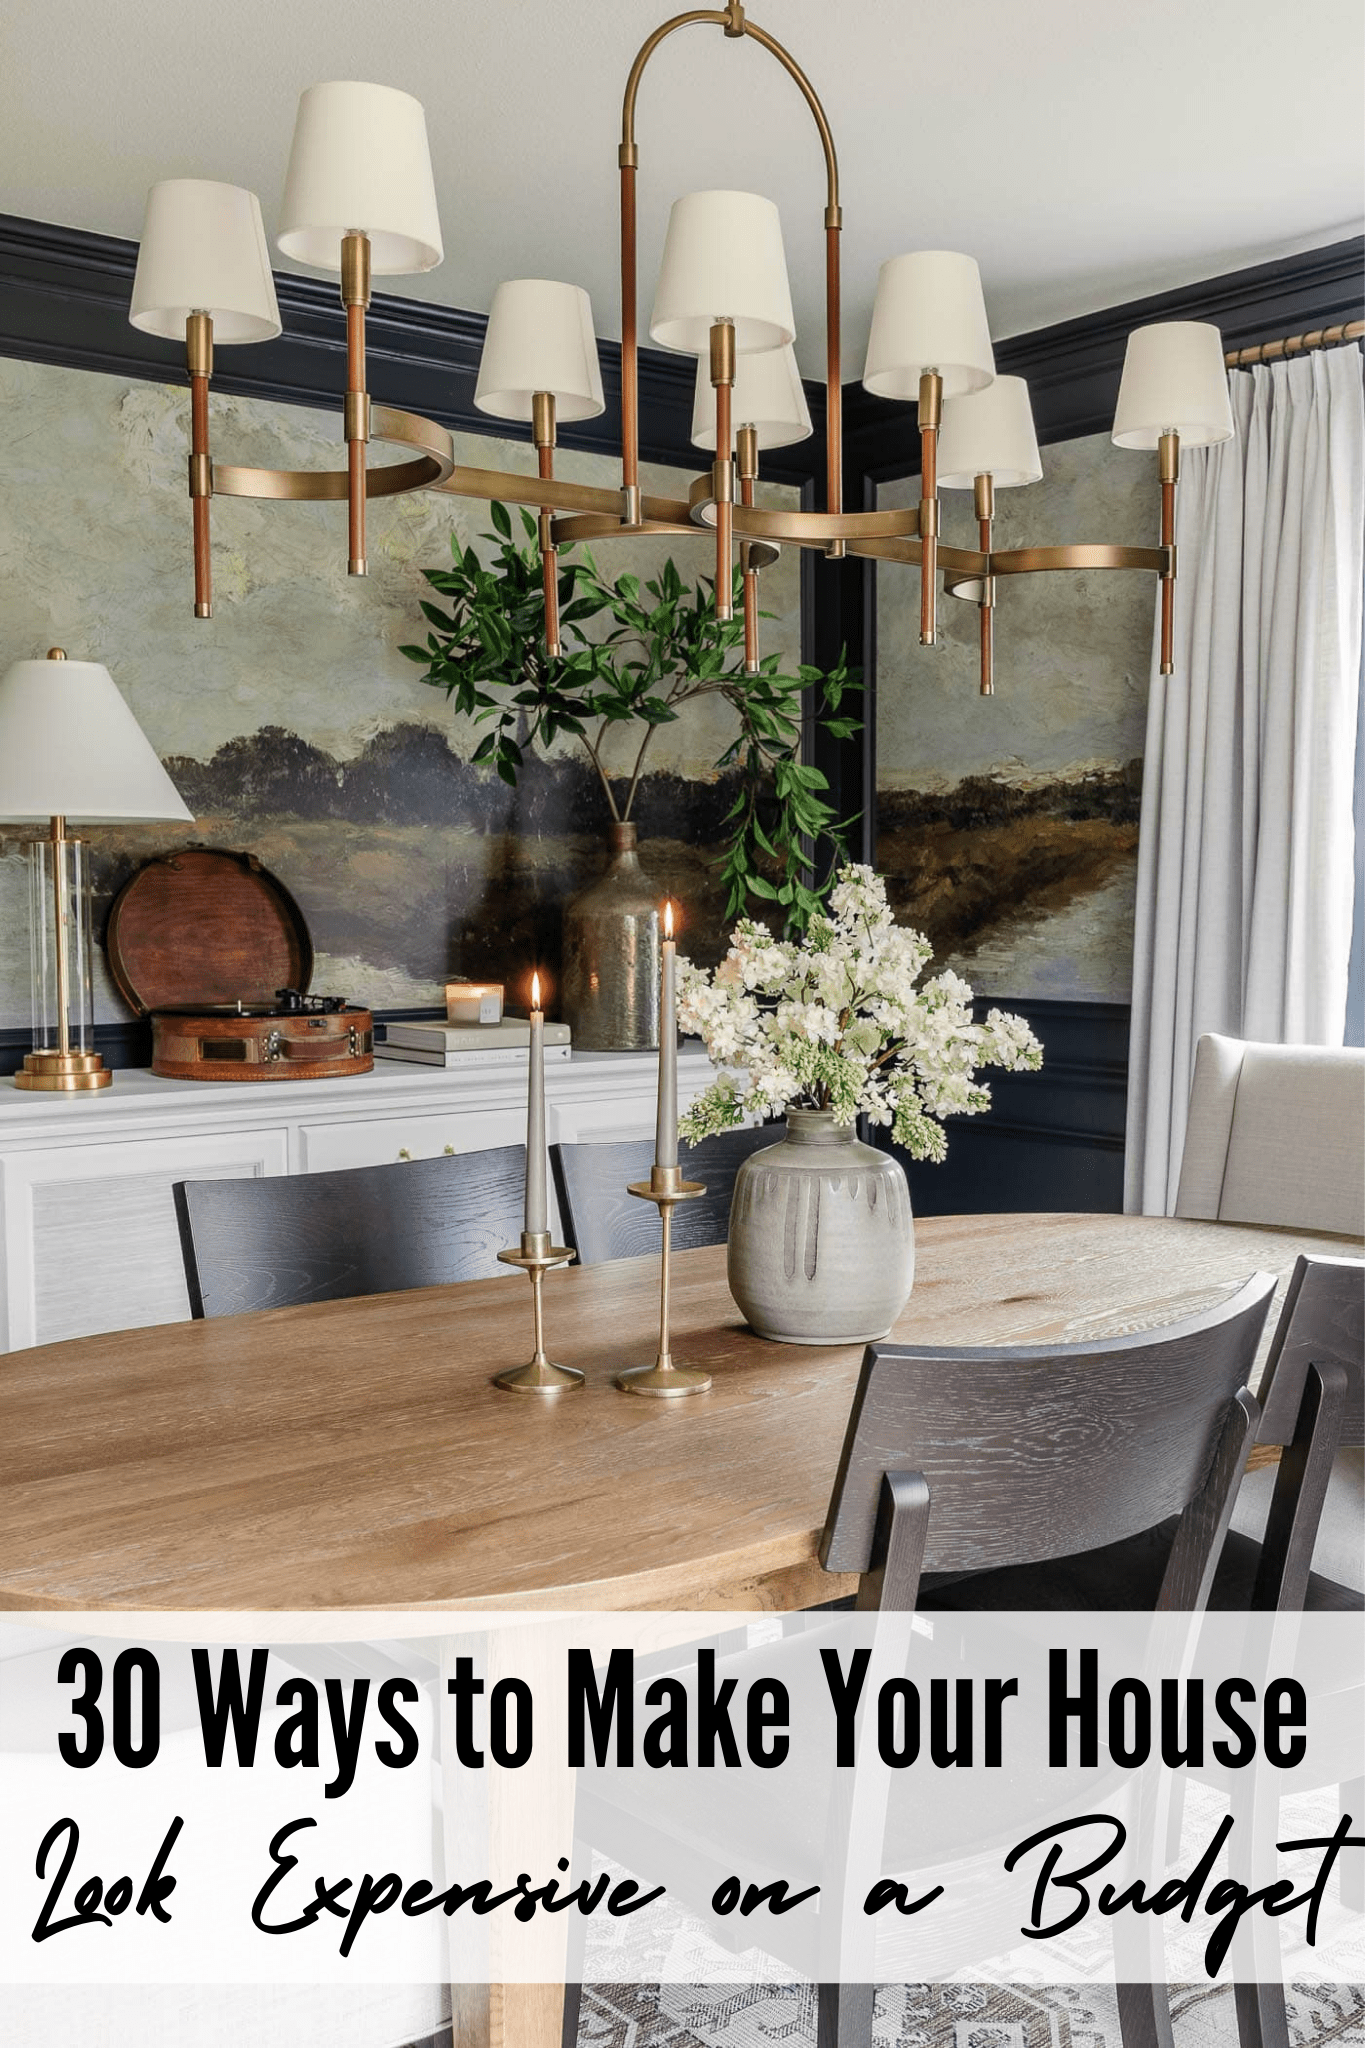 5 Maximize the amount of natural light